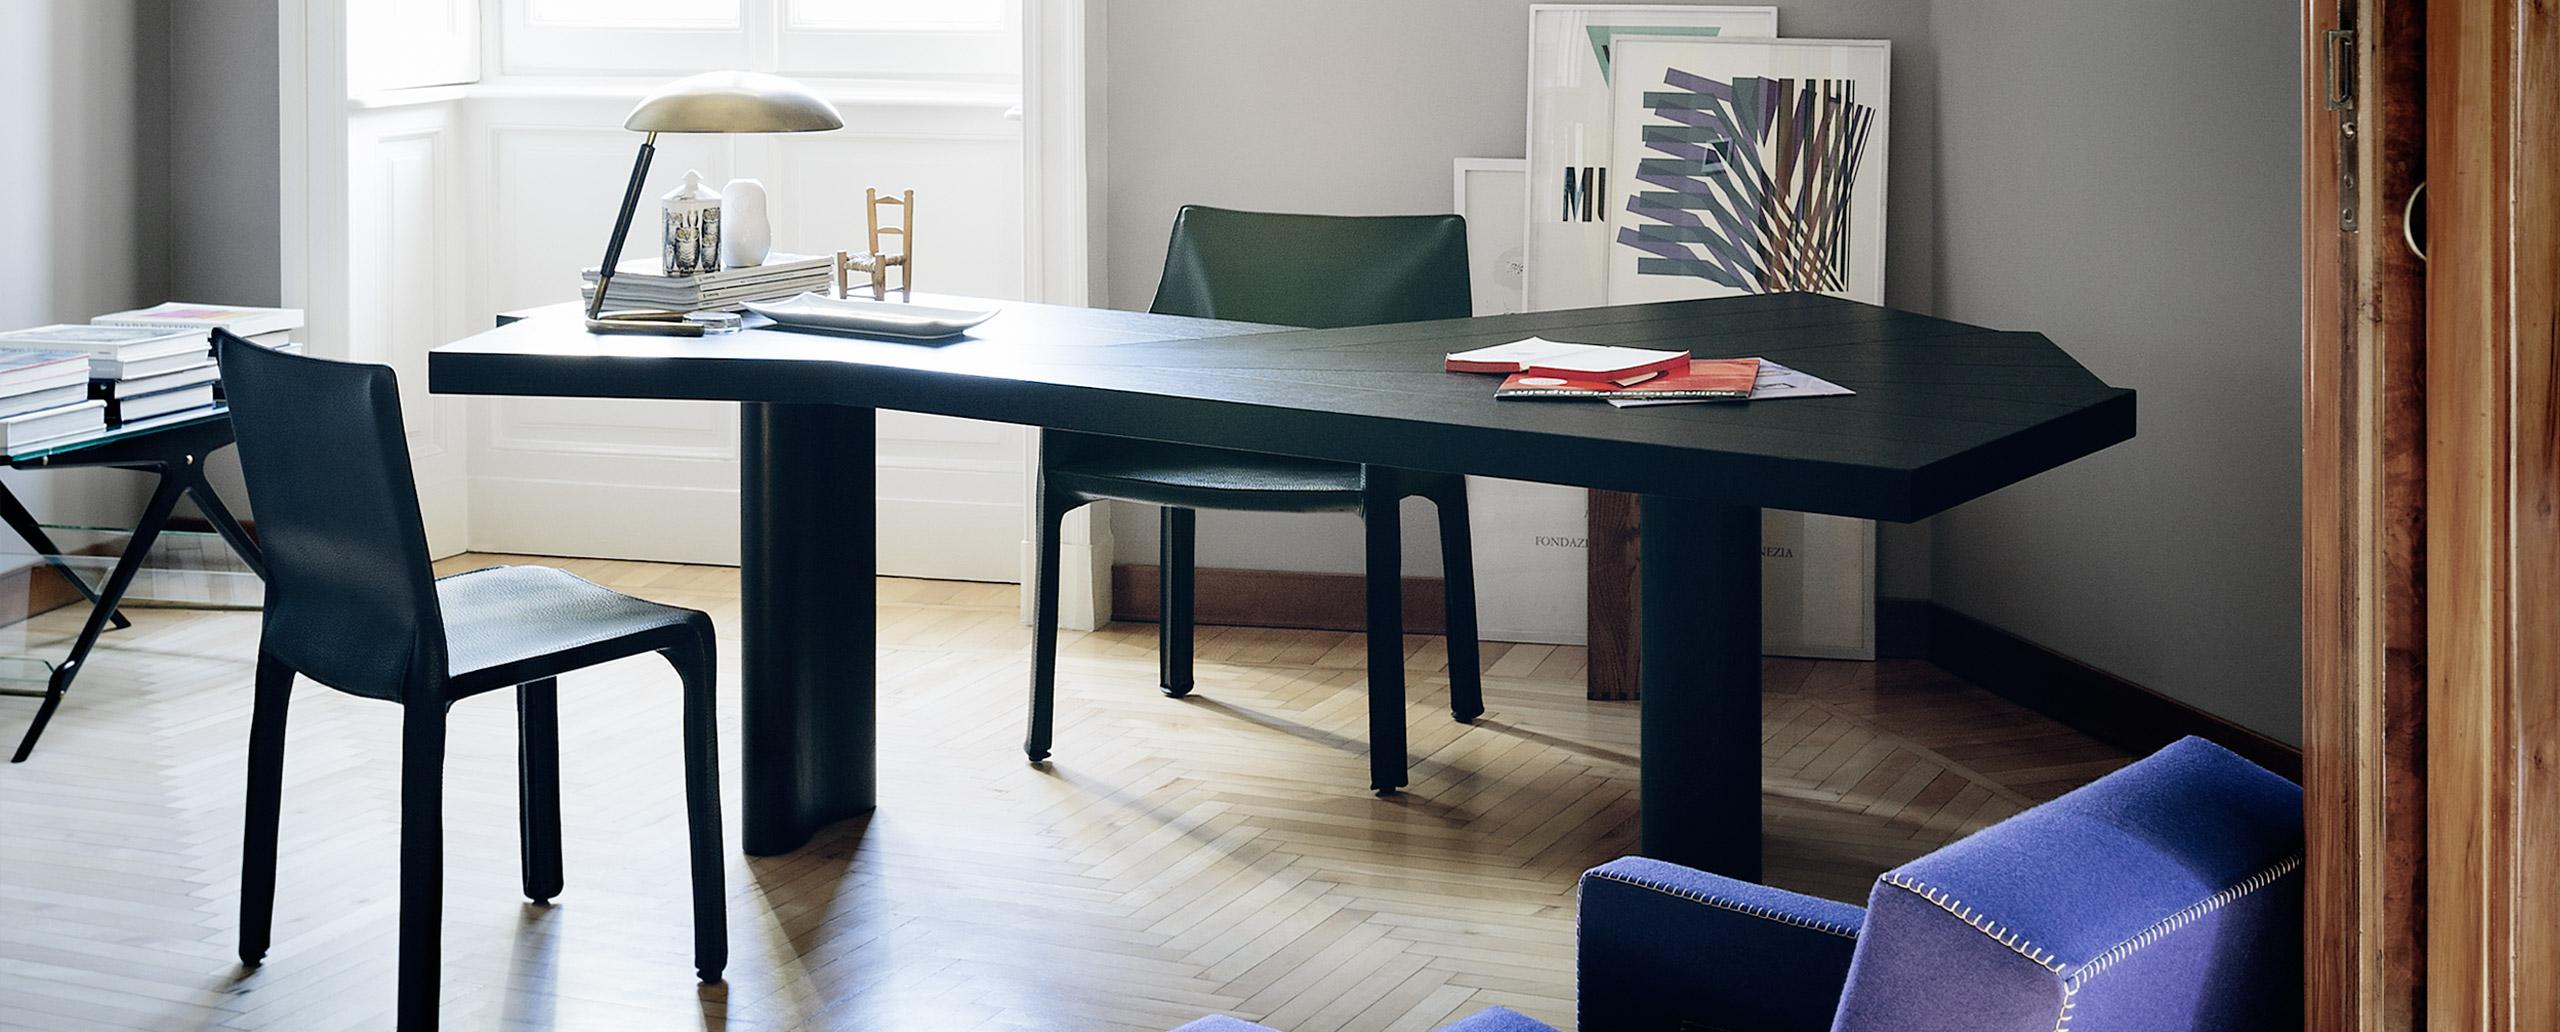 Charlotte Perriand Ventaglio Wood Stained Black Table by Cassina In New Condition For Sale In Barcelona, Barcelona